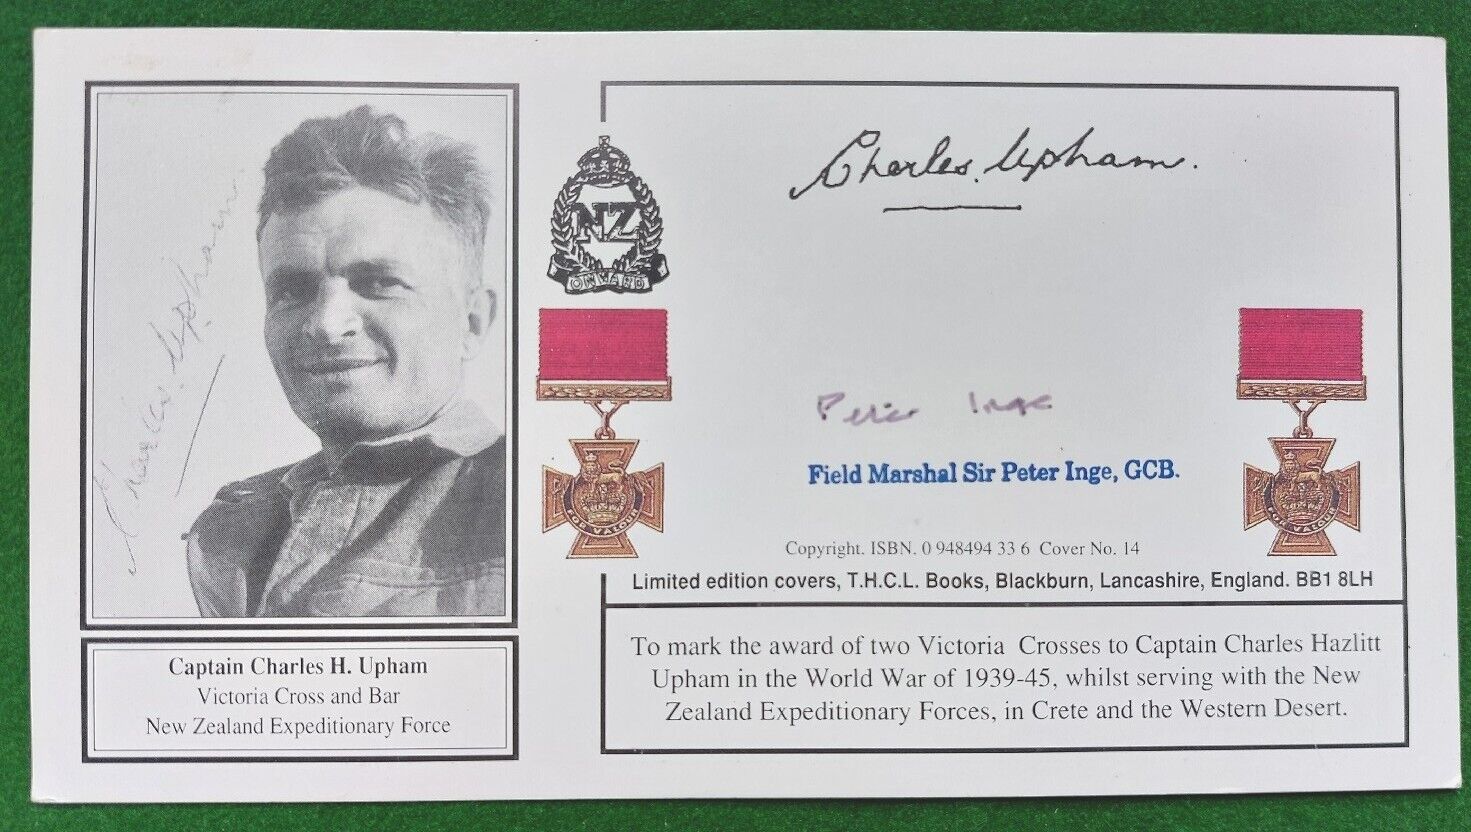 VICTORIA CROSS AUTOGRAPH BY FIELD MARSHALL ON BEHALF OF CHARLES H. UPHAM VC